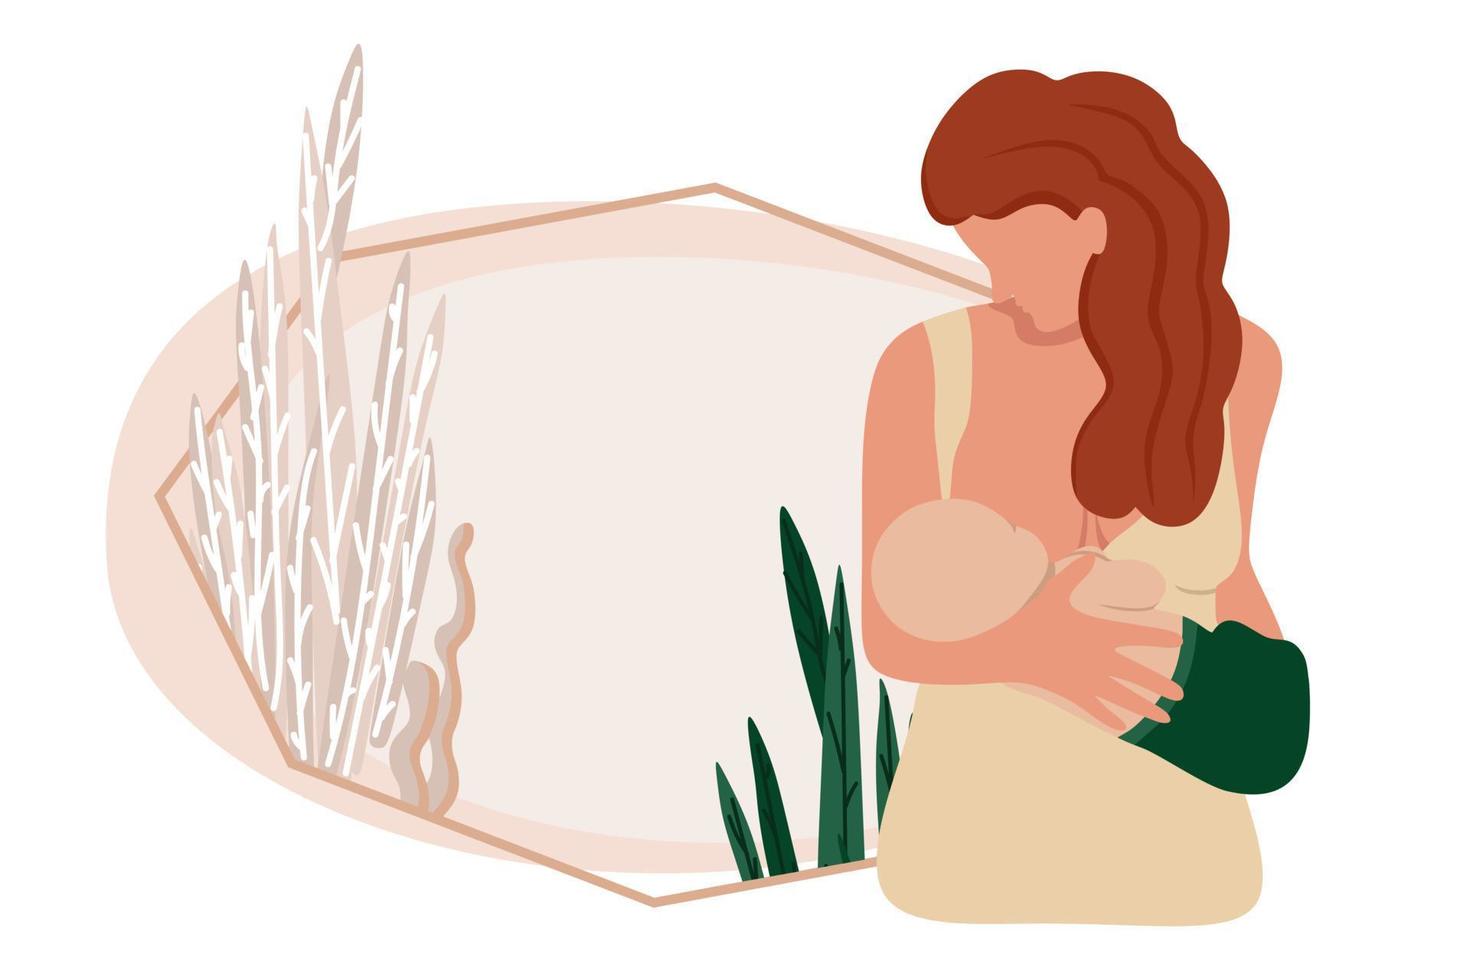 Breastfeeding. A mother is breastfeeding a child. vector